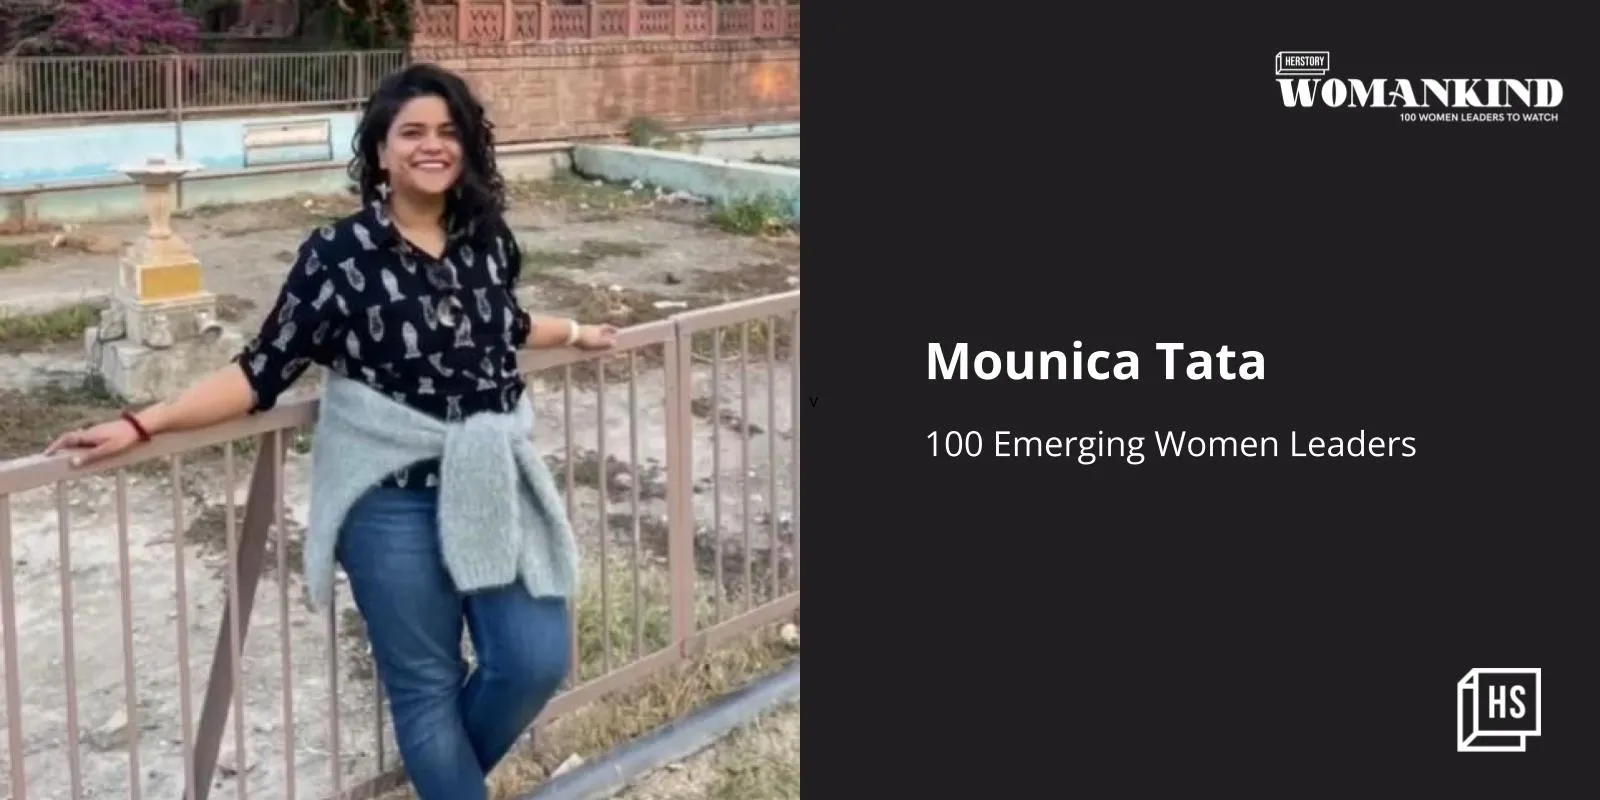 [100 Emerging Women Leaders] Meet Mounica Tata, who highlights crucial issues through illustrations